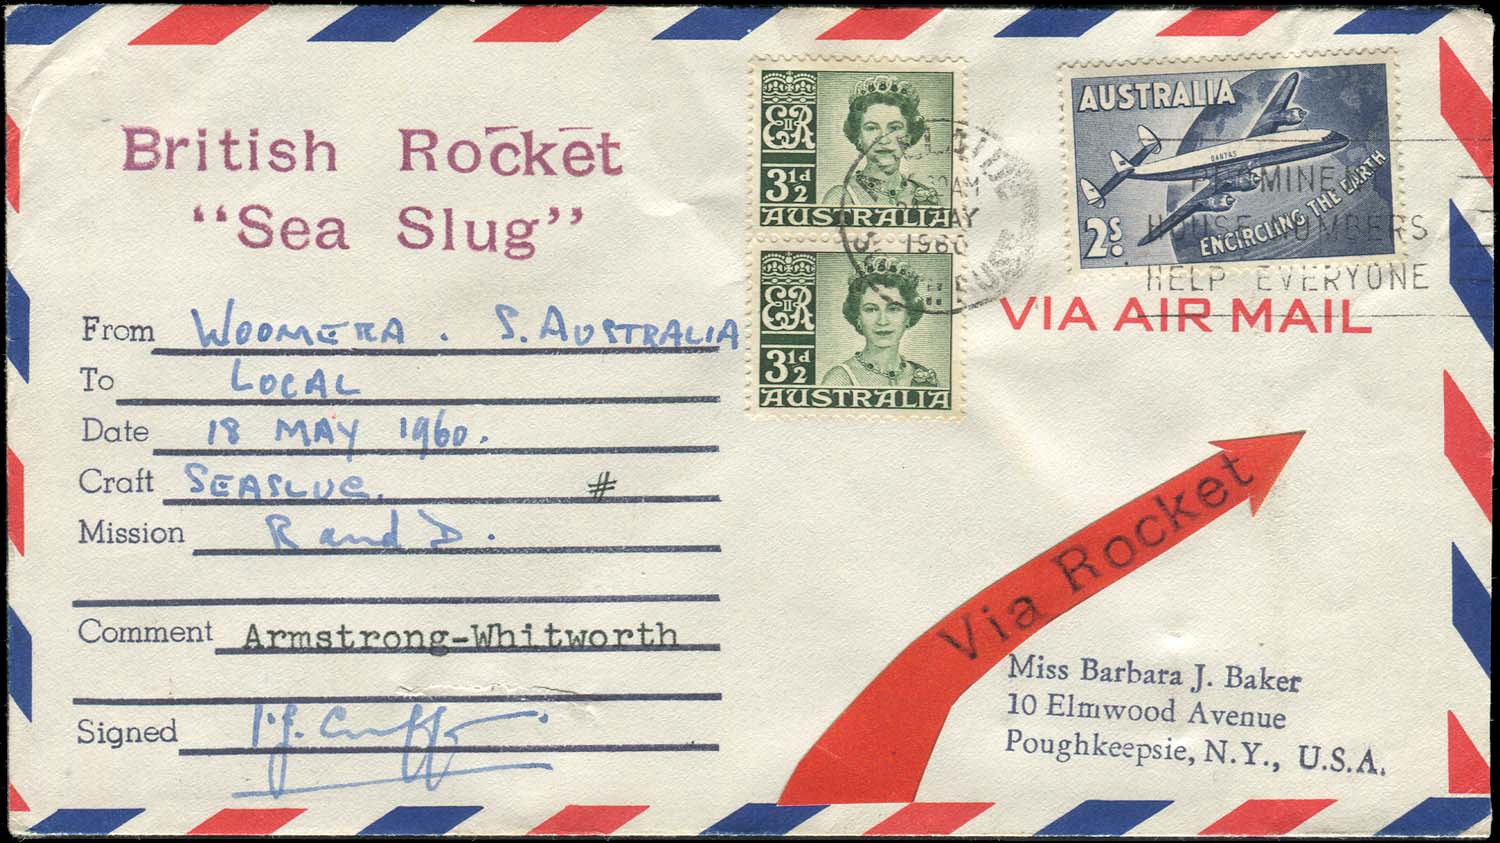 A stamped, addresse envelope. The address of origin is in Woomera, Australia, and the means of deliverance is said to be "British Rocket Sea Slug."